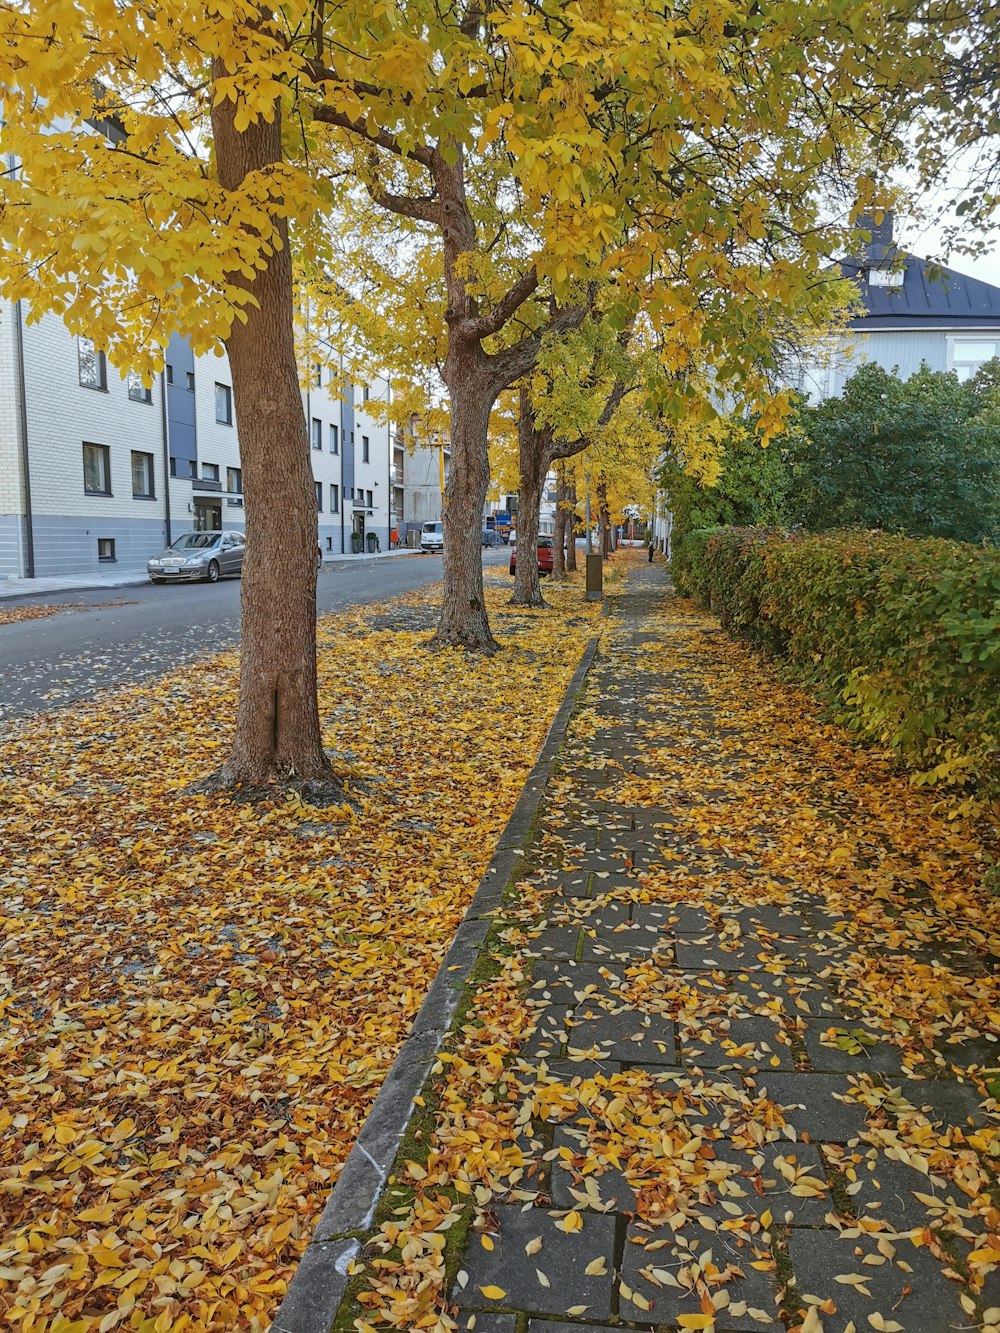 a path with trees and leaves on the ground